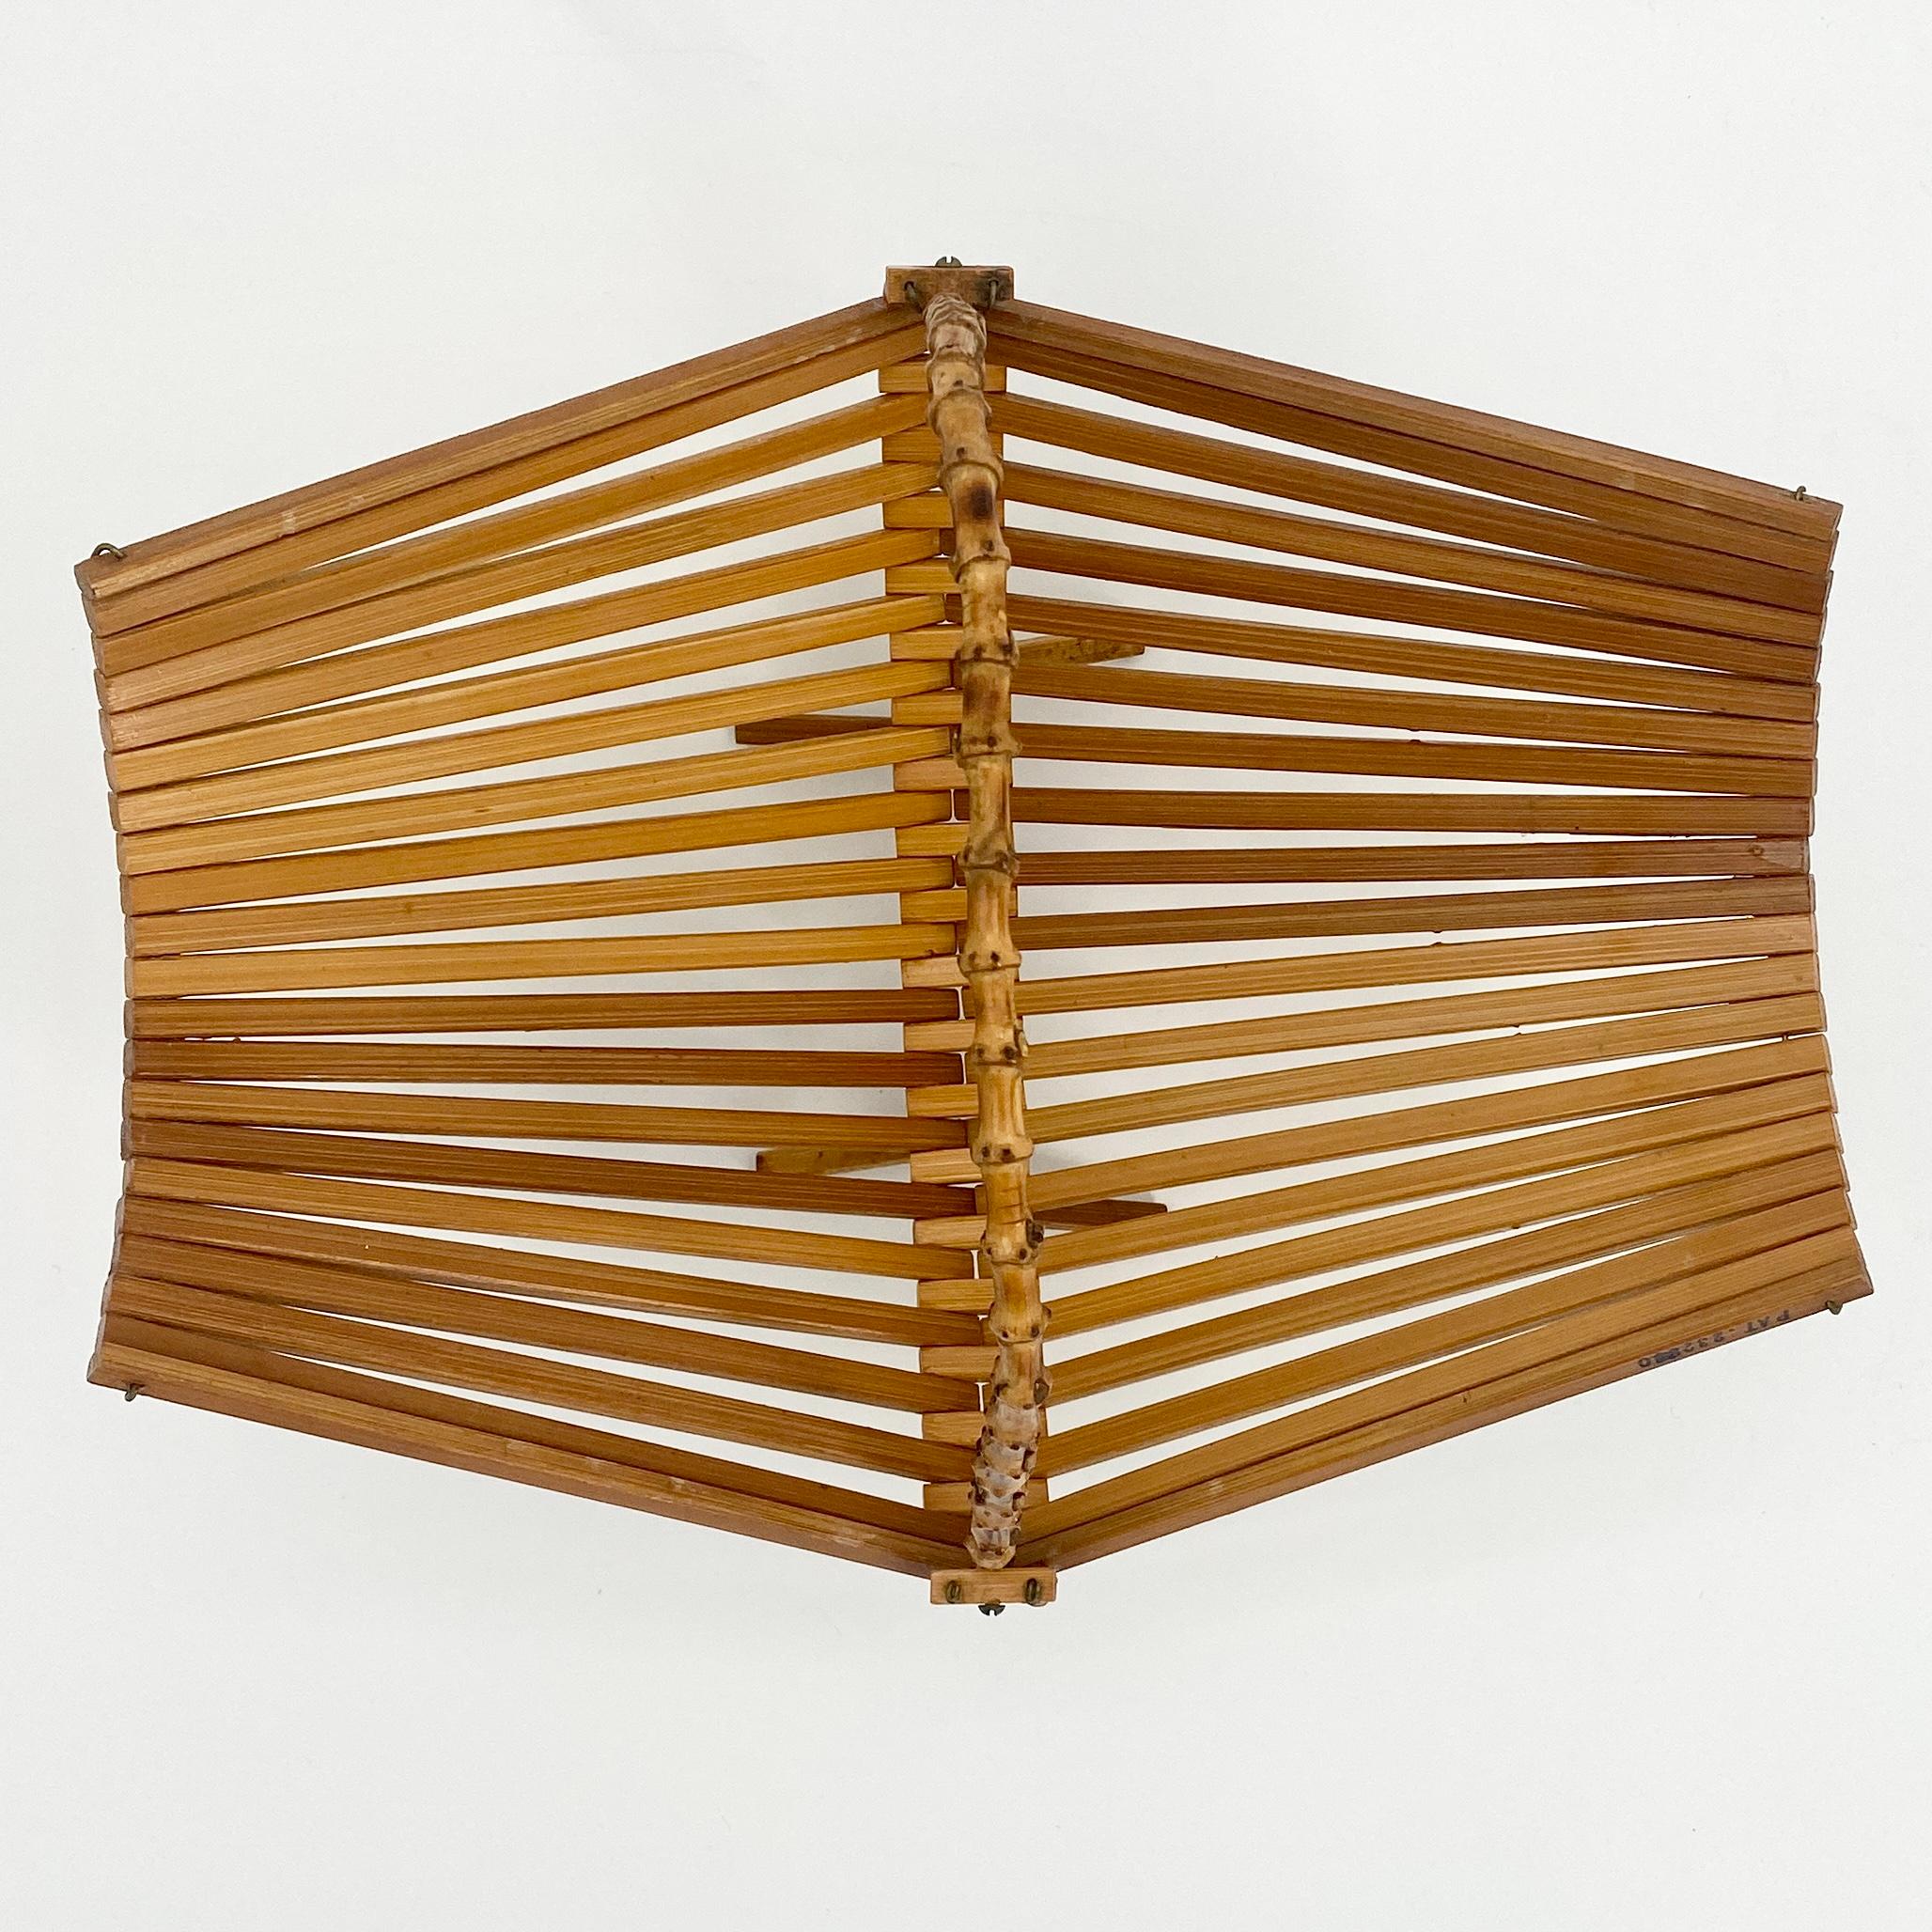 Architectural Bread or Fruit Kitchen Basket with Bamboo Handle, Denmark 5